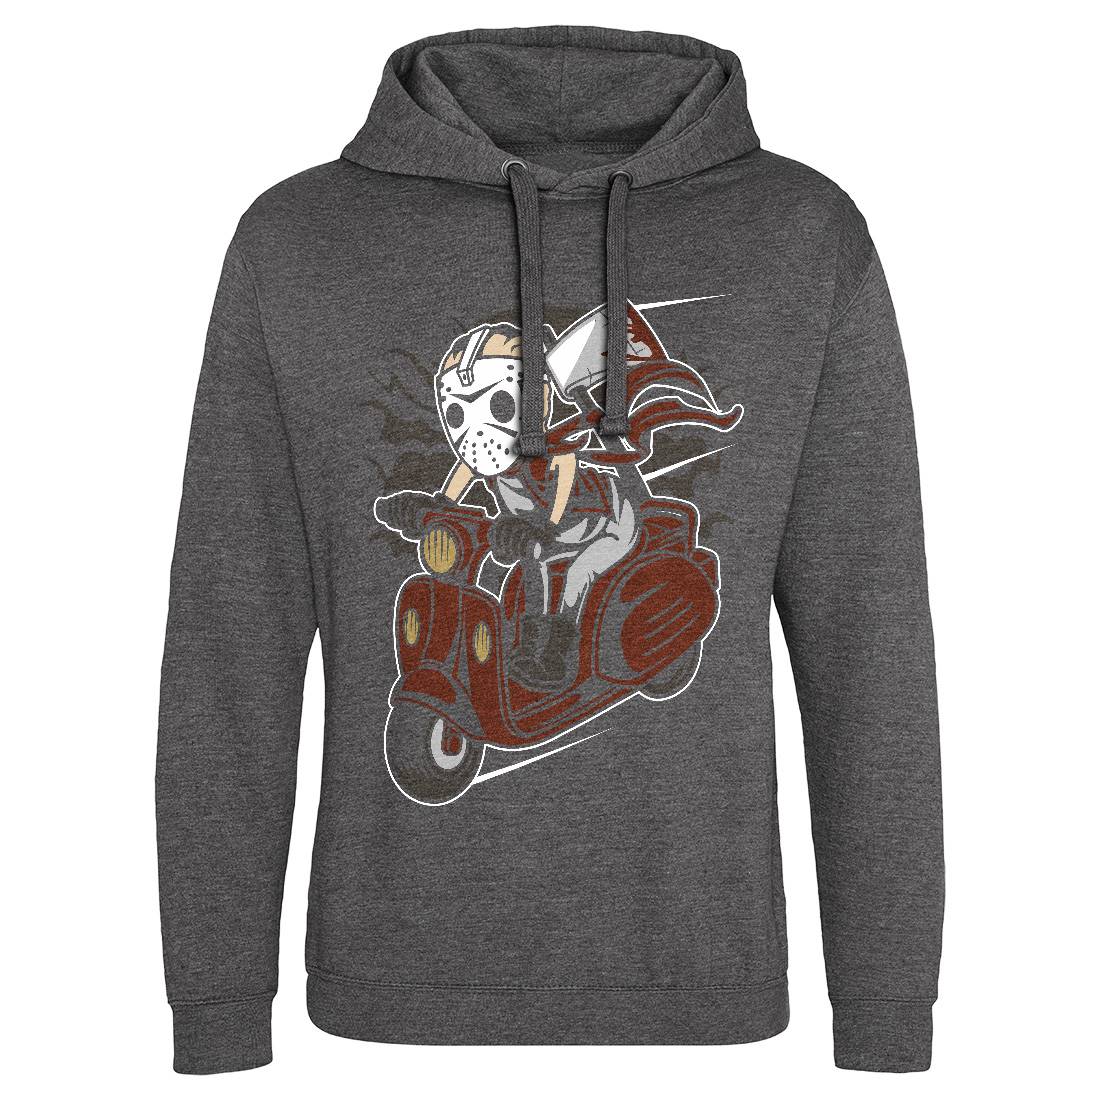 Slayer Scooter Mens Hoodie Without Pocket Motorcycles C447